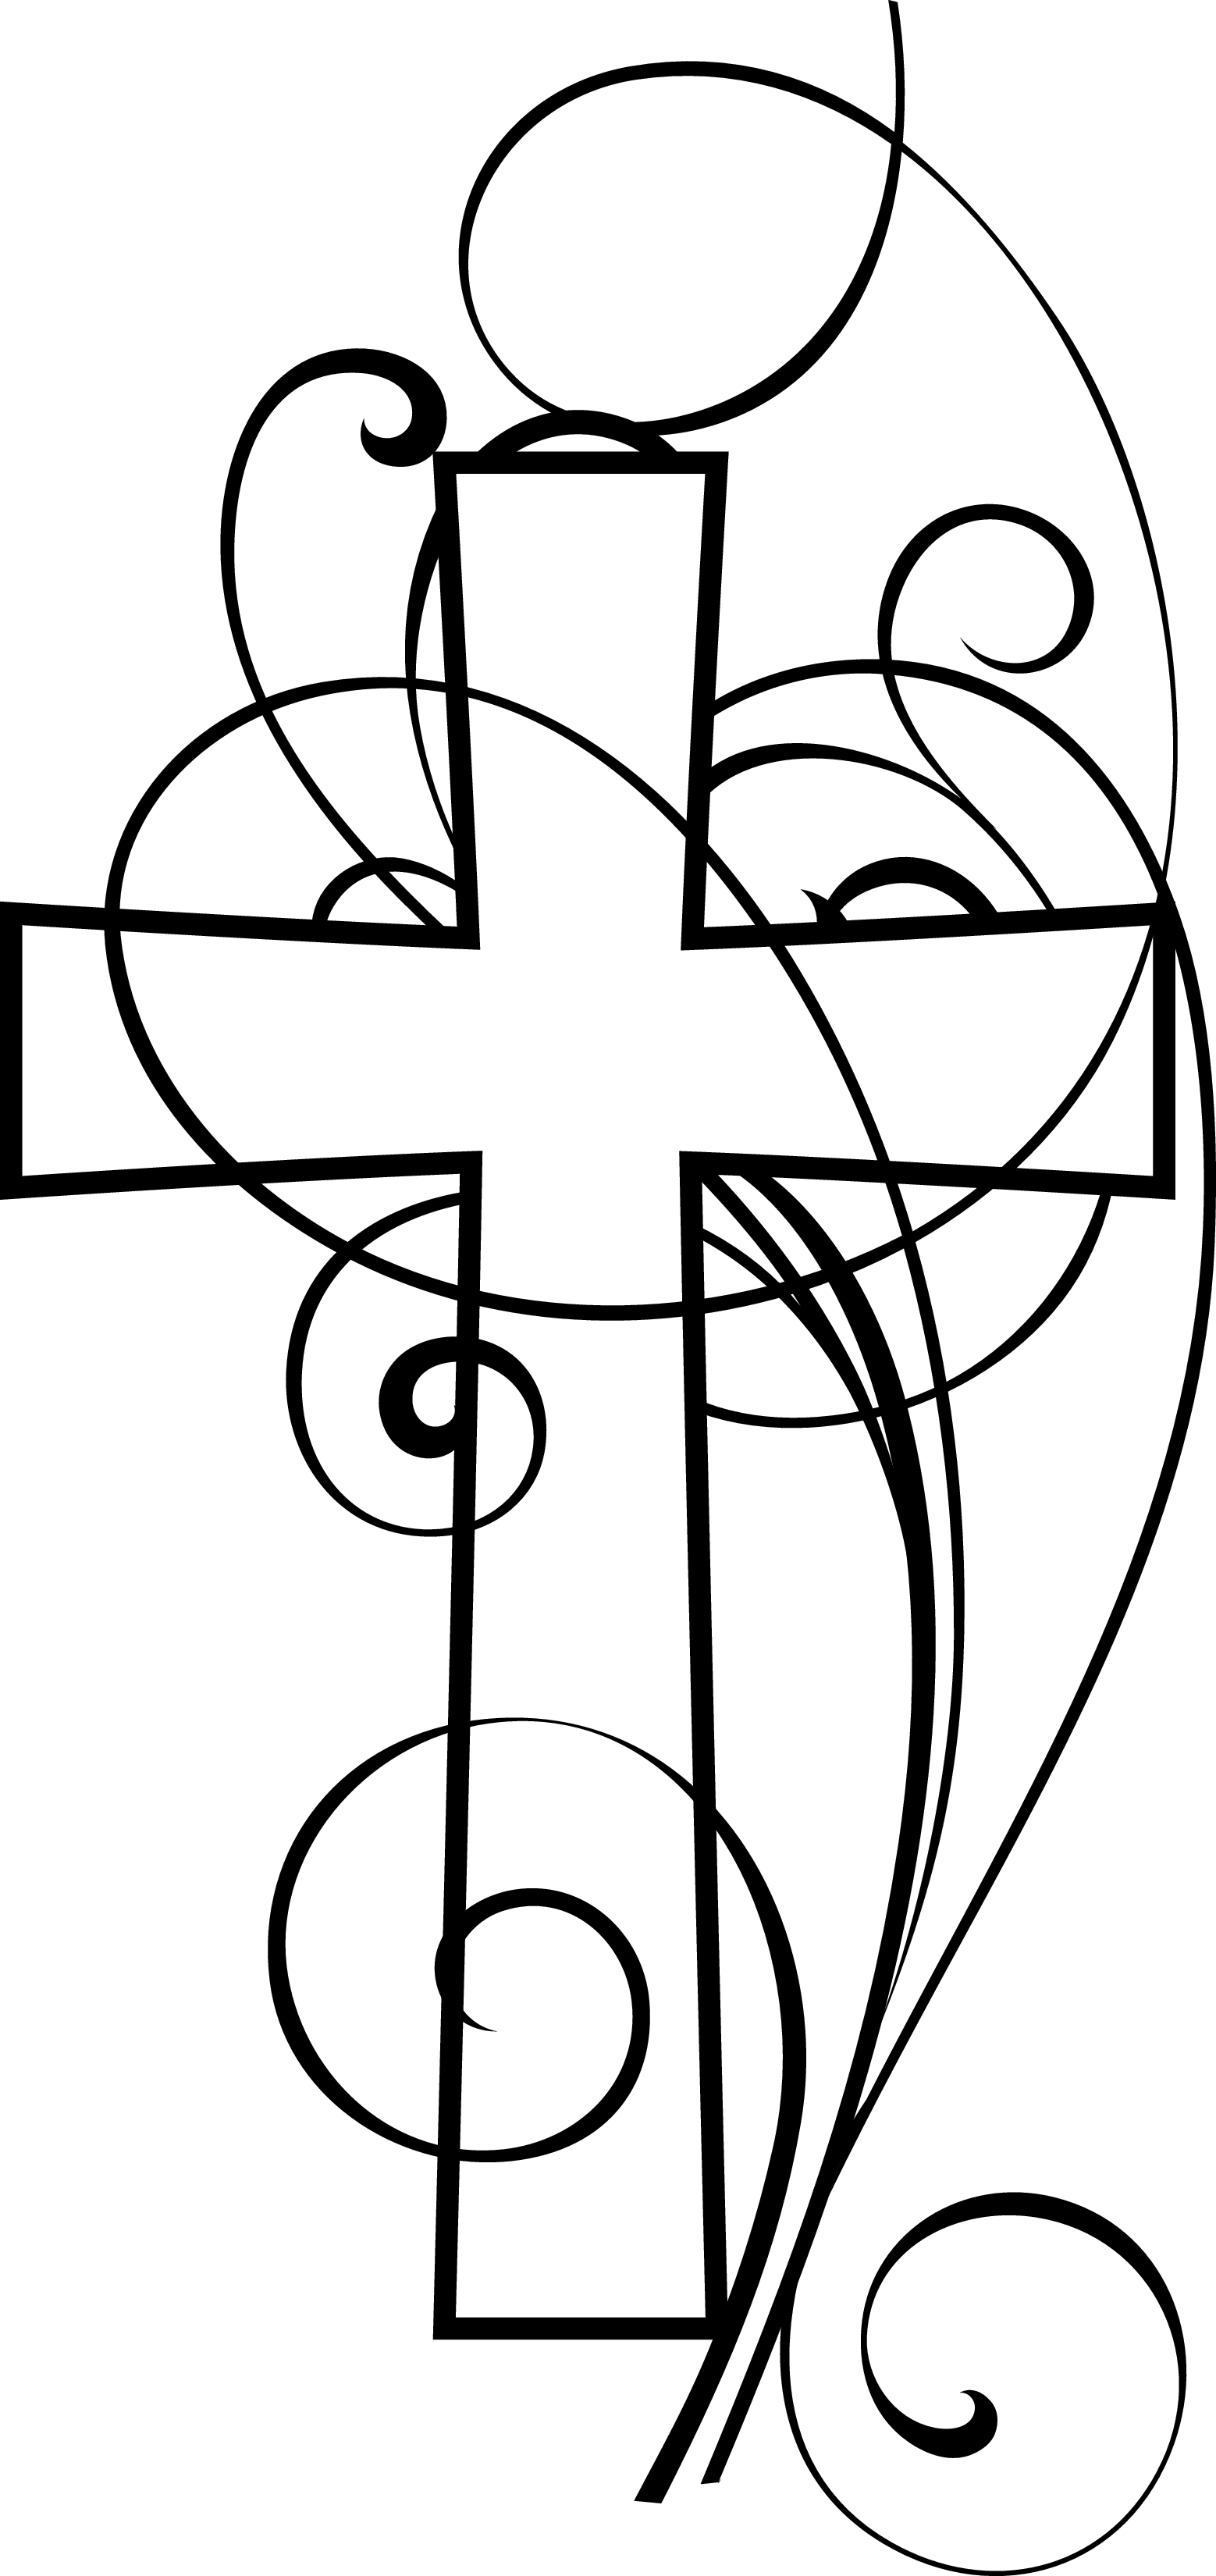 free clip art cross and bible - photo #47